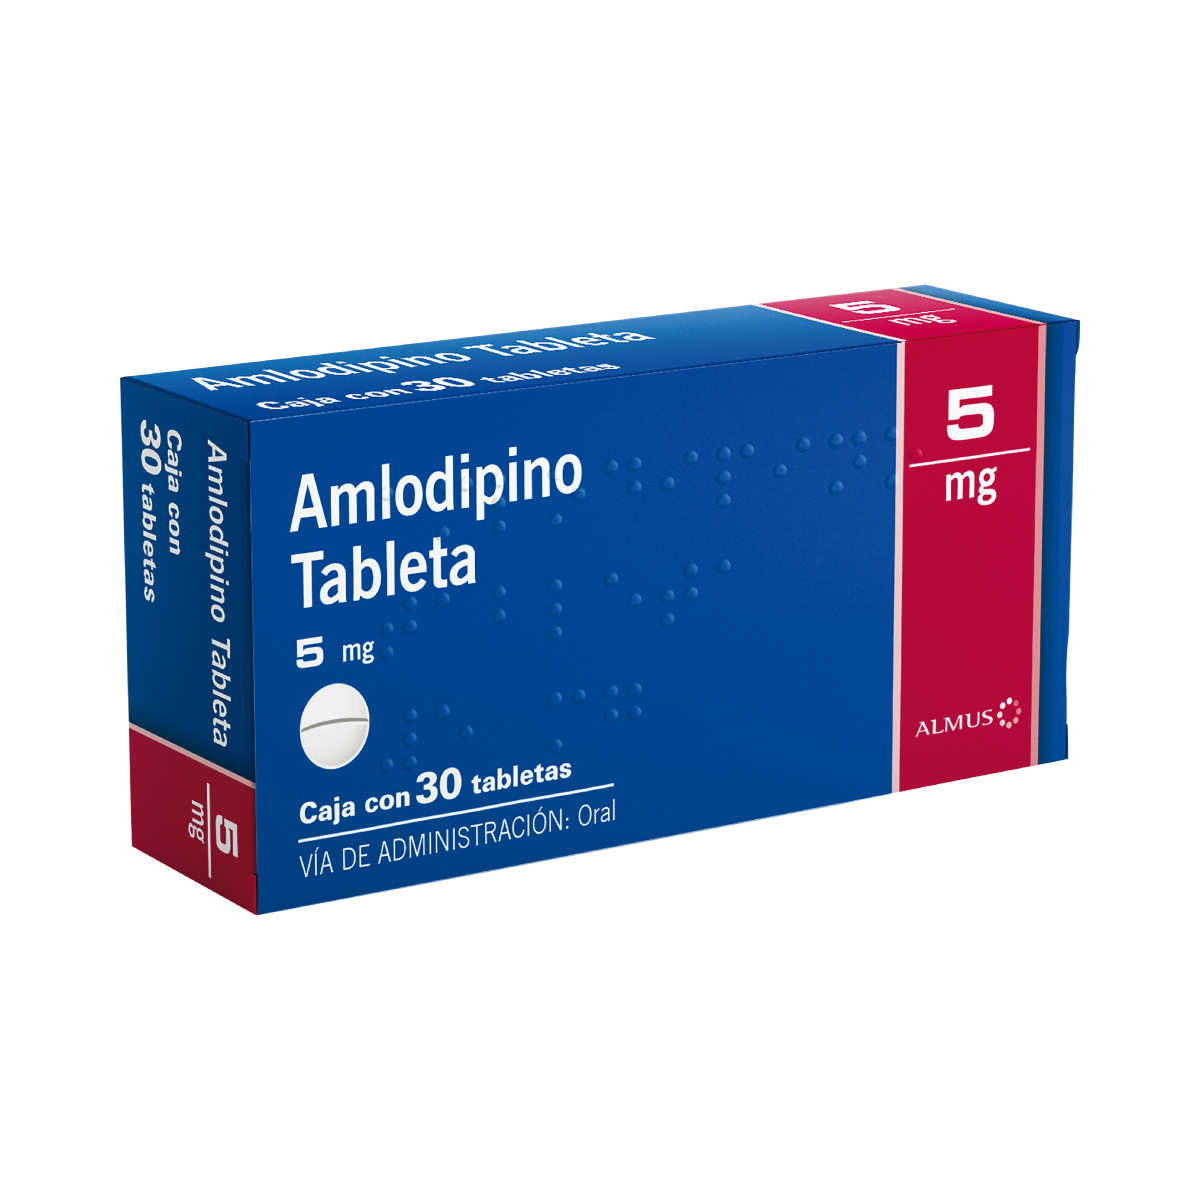 What Is The Best Time To Take Amlodipine?